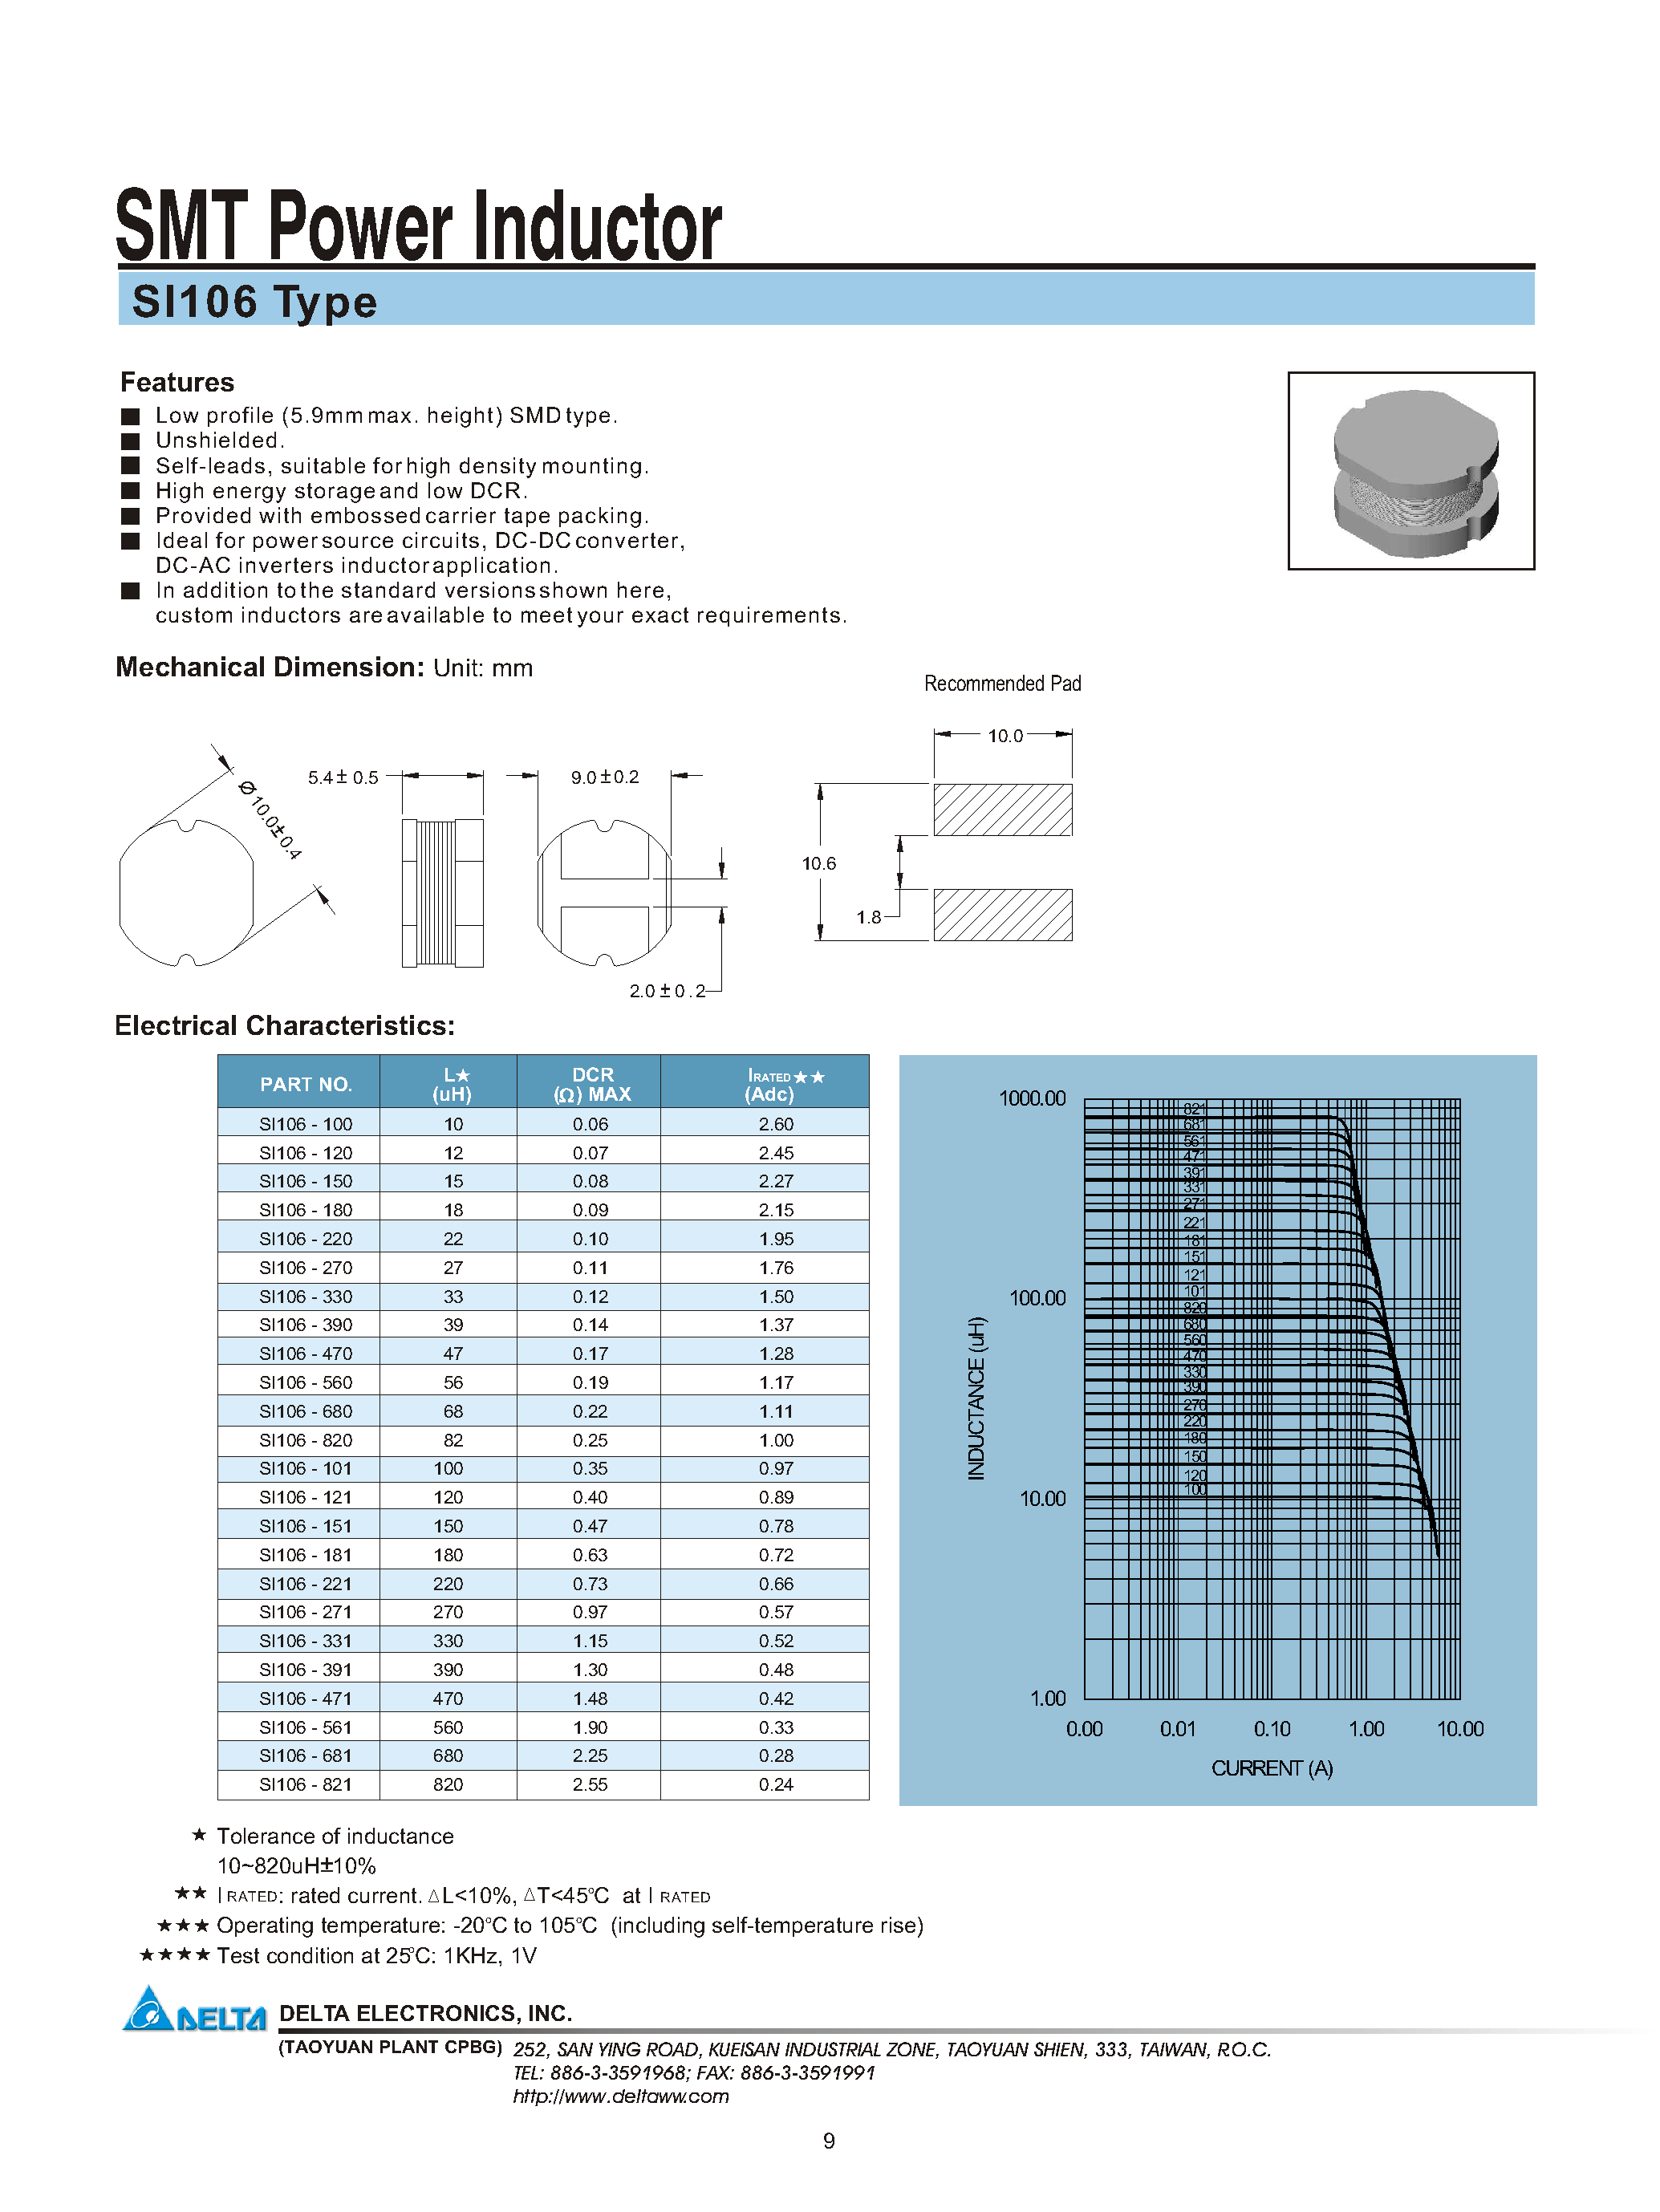 Datasheet SI106 - SMT Power Inductor page 1